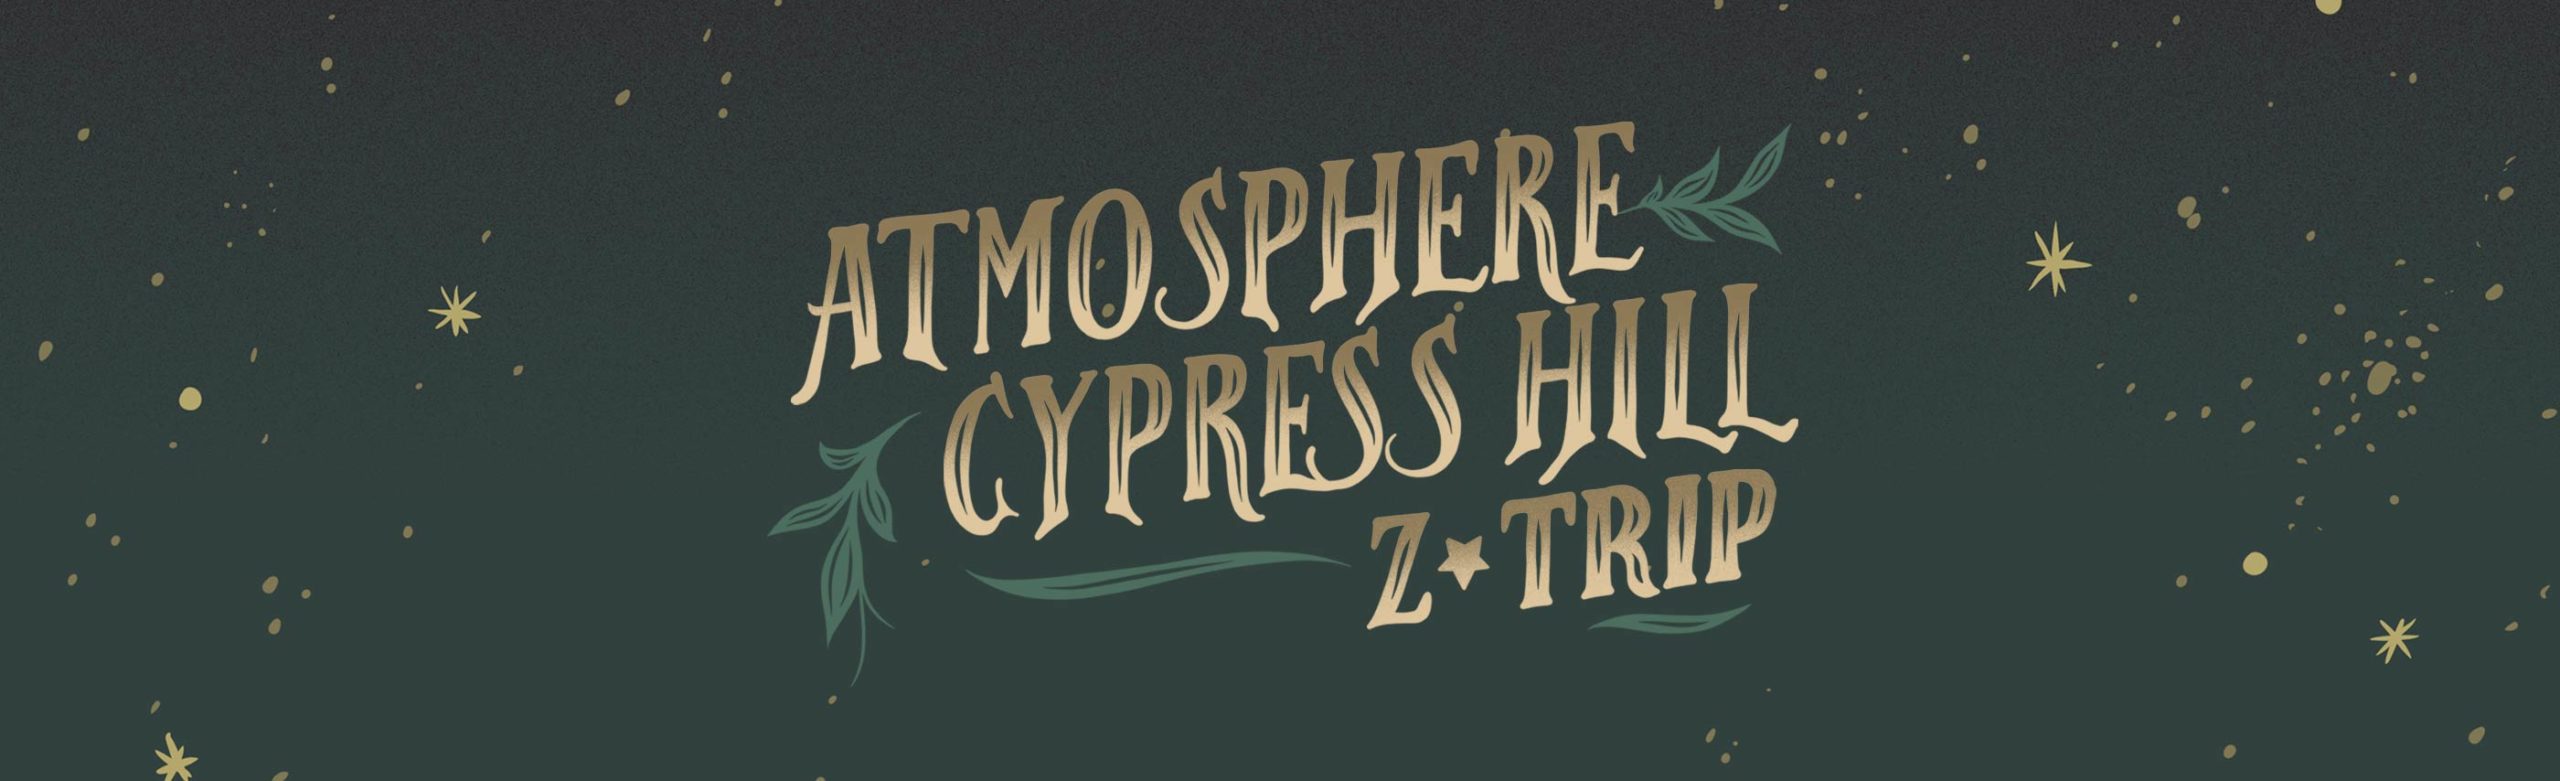 Event Info: Atmosphere & Cypress Hill at KettleHouse Amphitheater 2021 Image